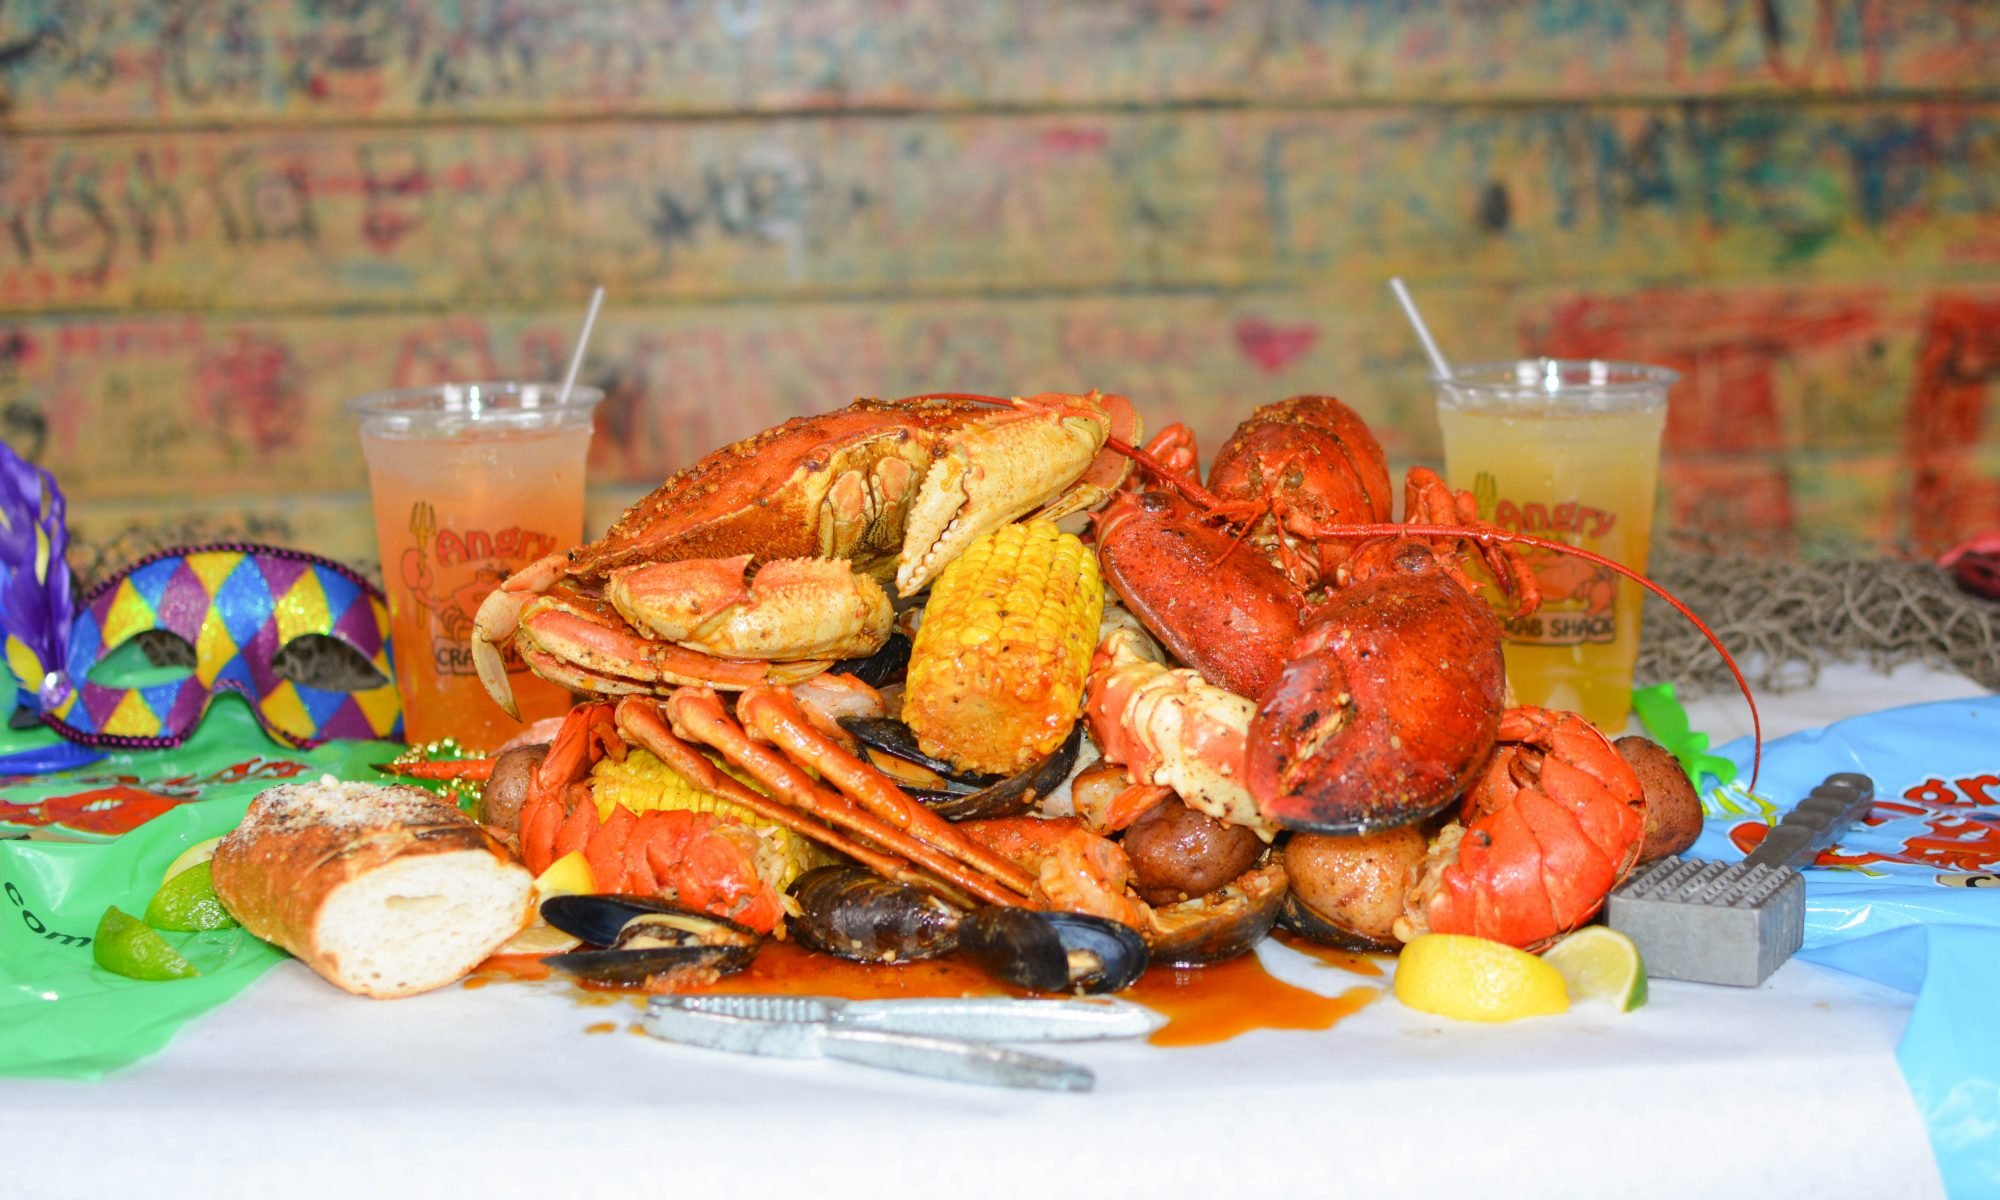 Cooked Snow Crab, Lobster, Corn, Potatoes, and Mussels laid on the Angry Crab Table Seasoned to perfection and ready to be devoured!